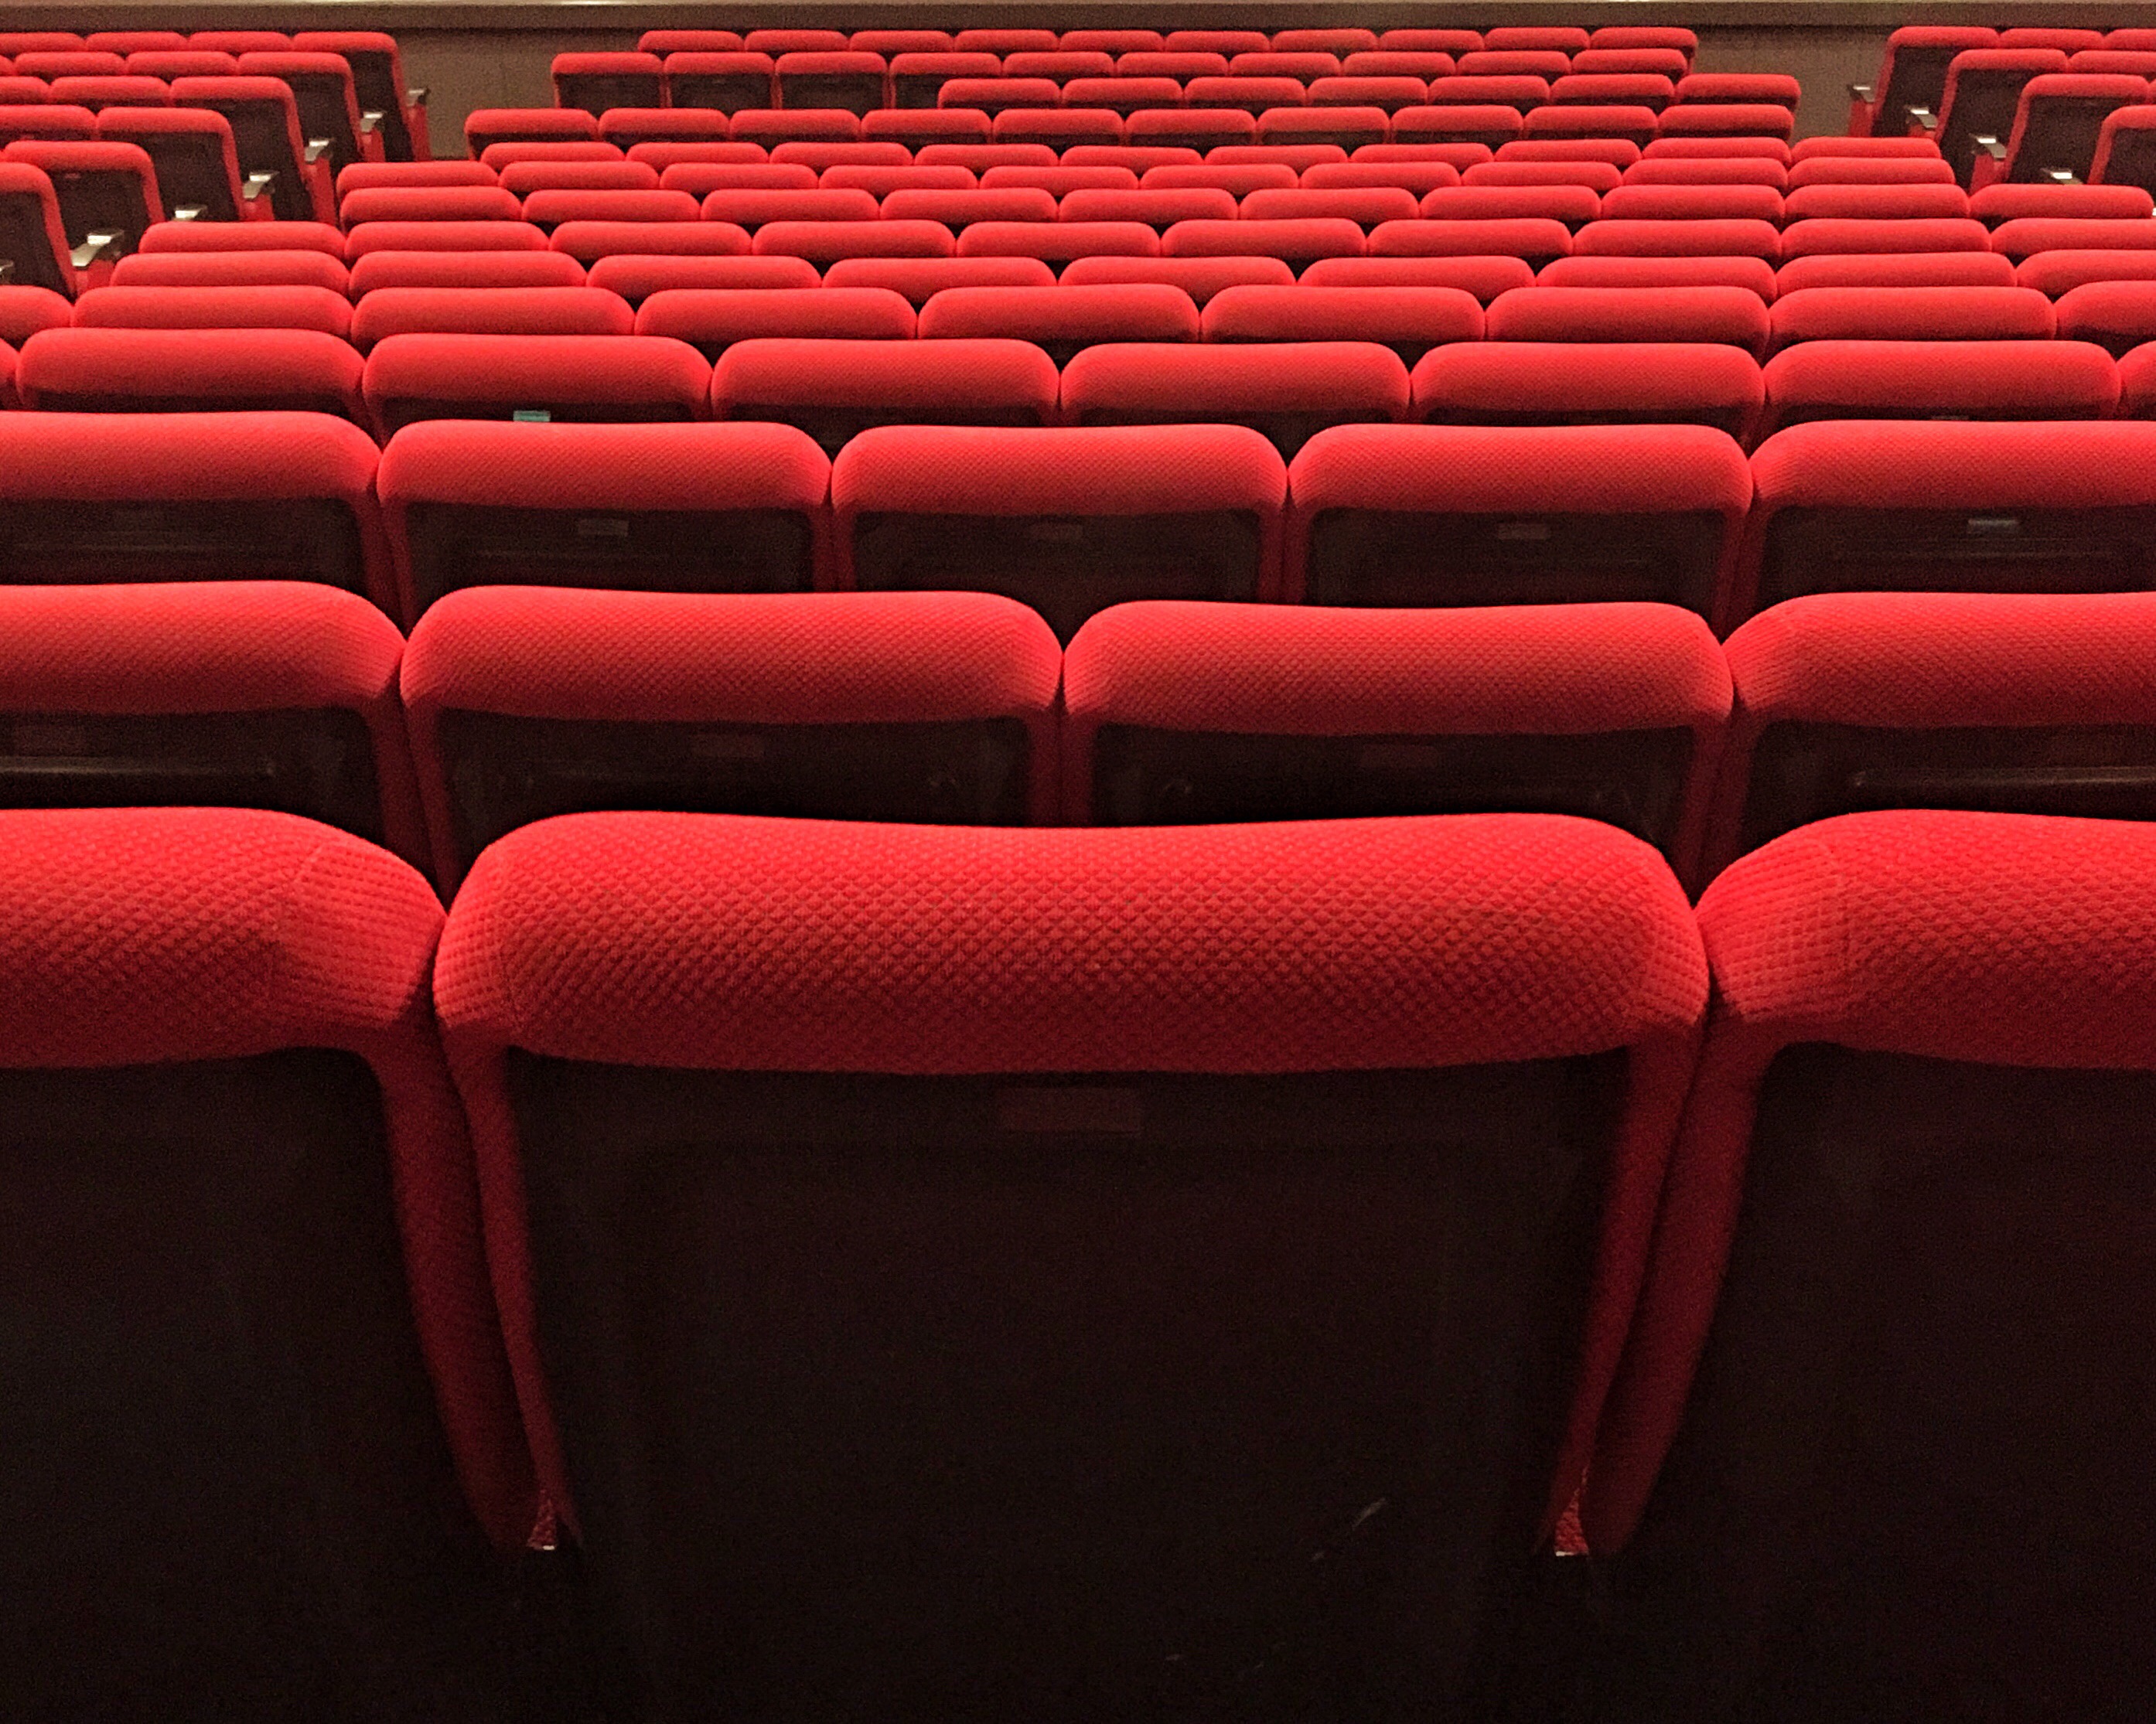 Picture shows rows of empty theatre seating 